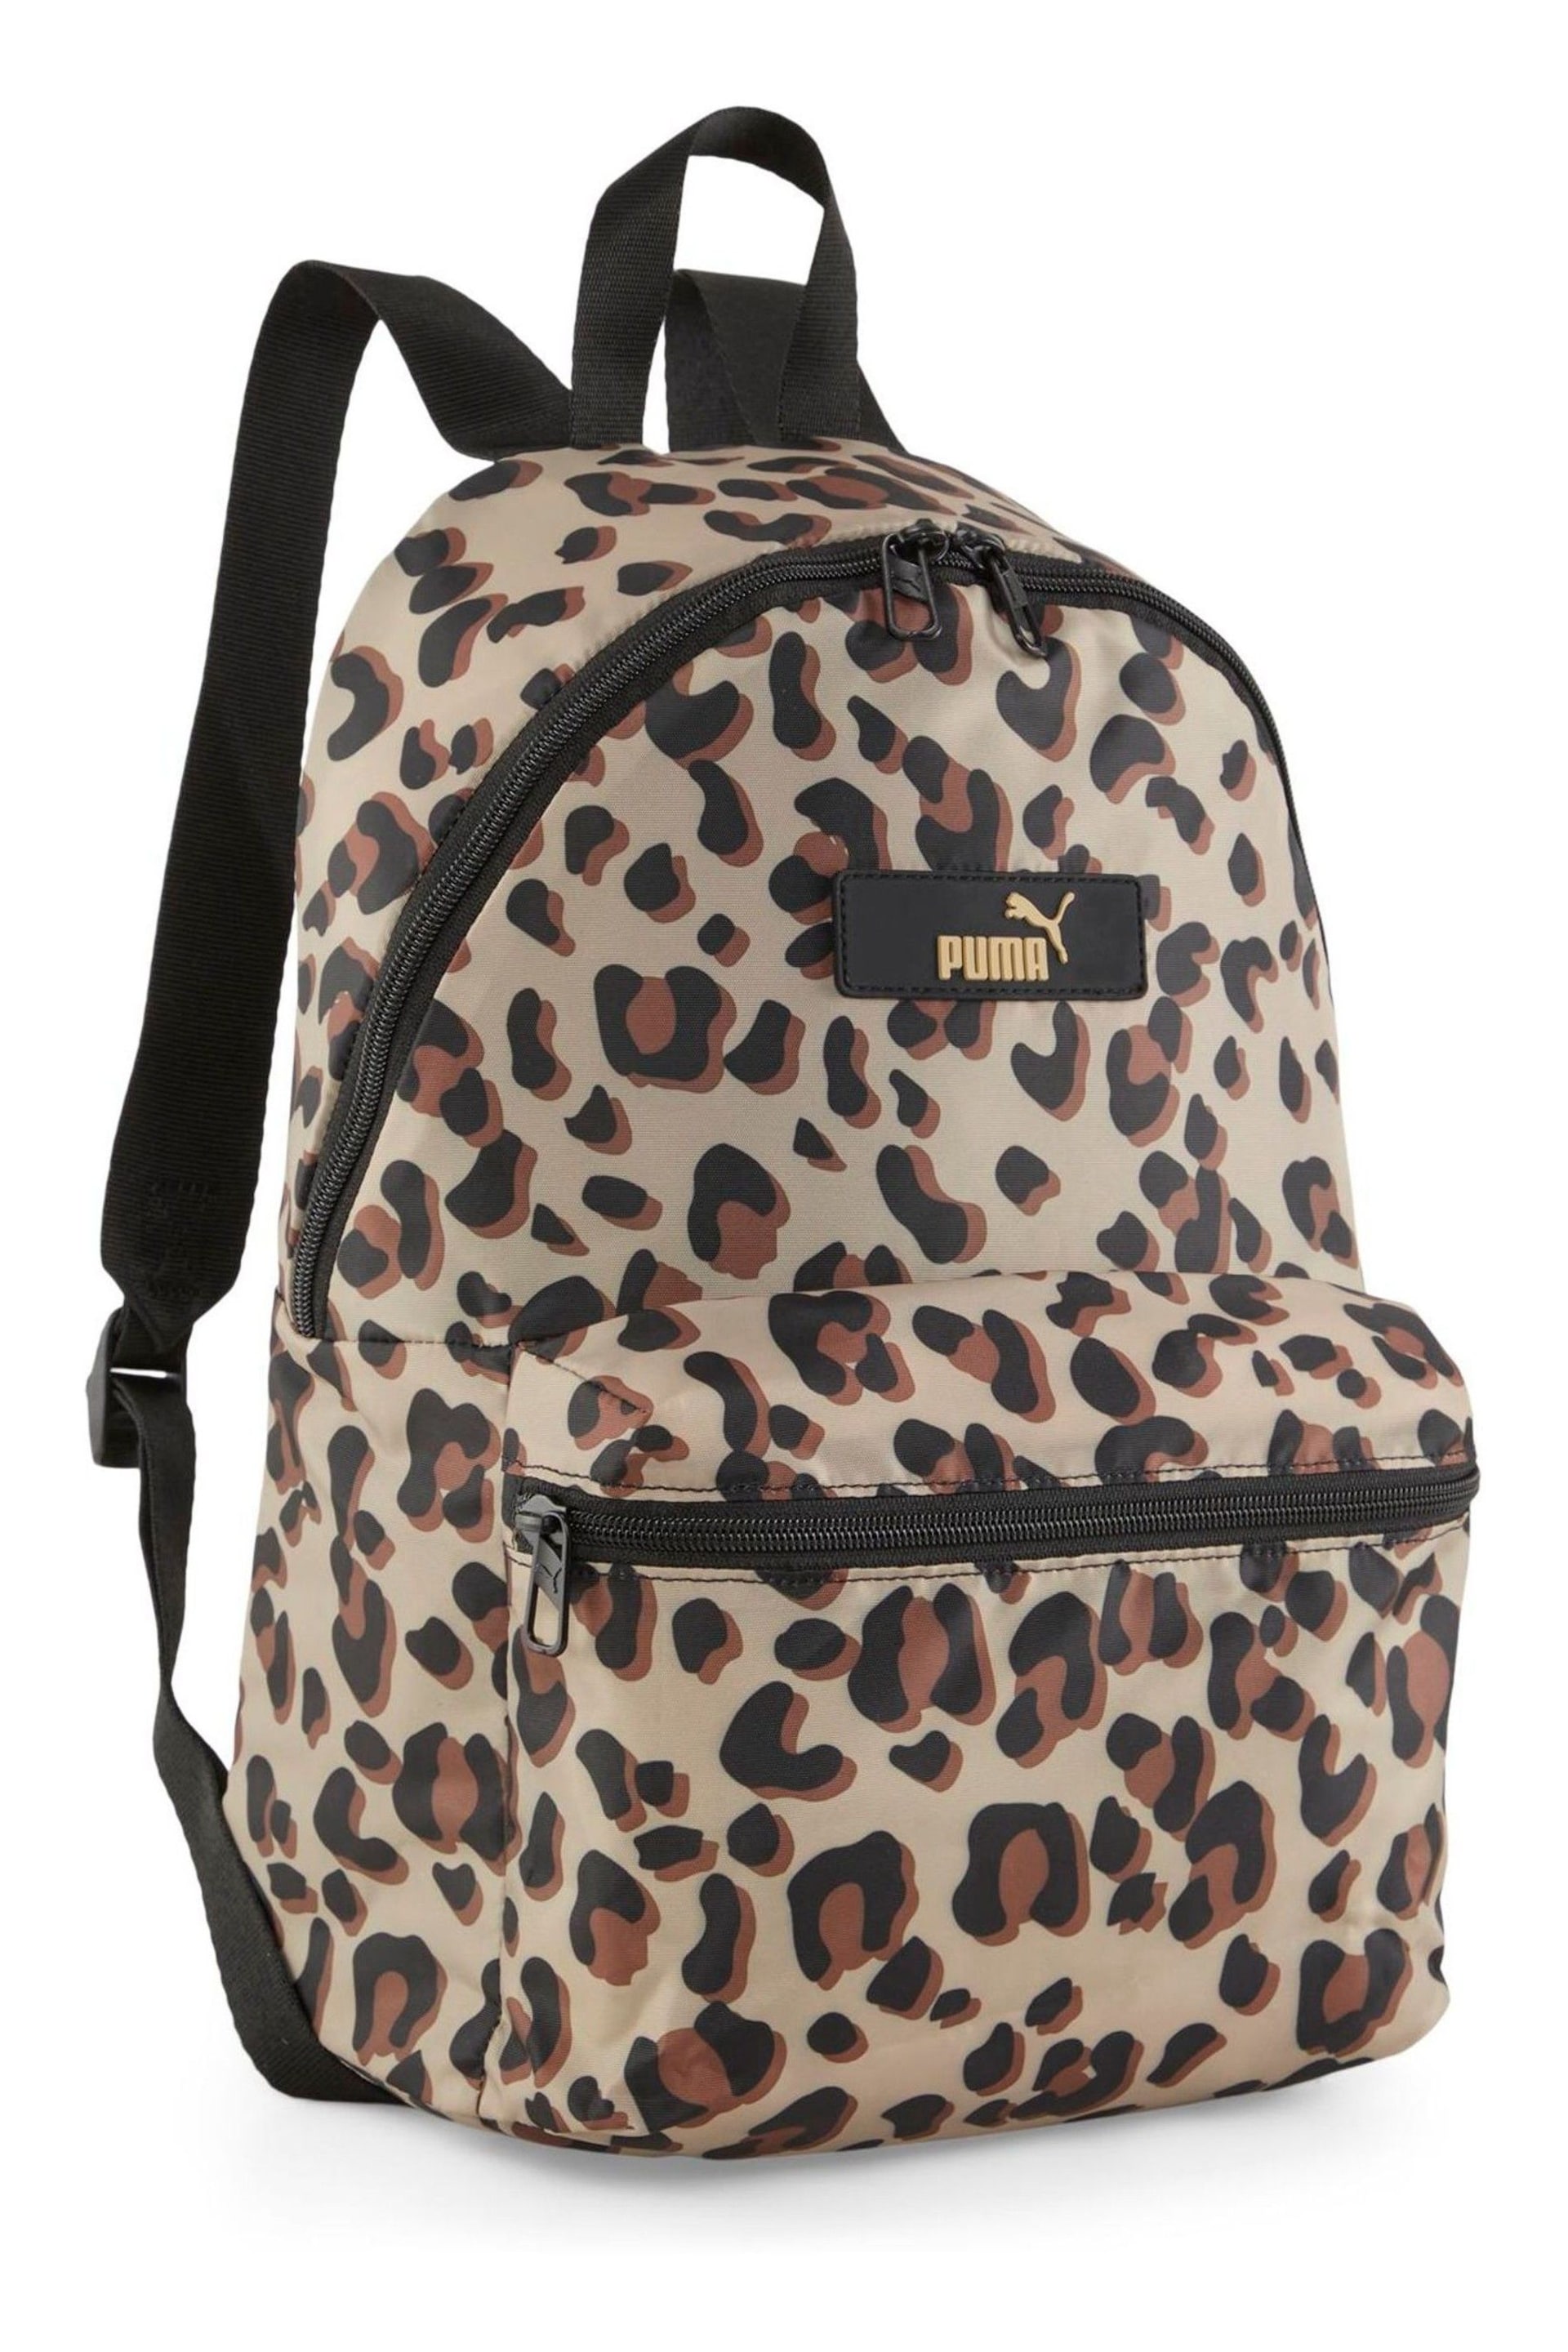 Puma Natural Core Pop Backpack - Image 1 of 5